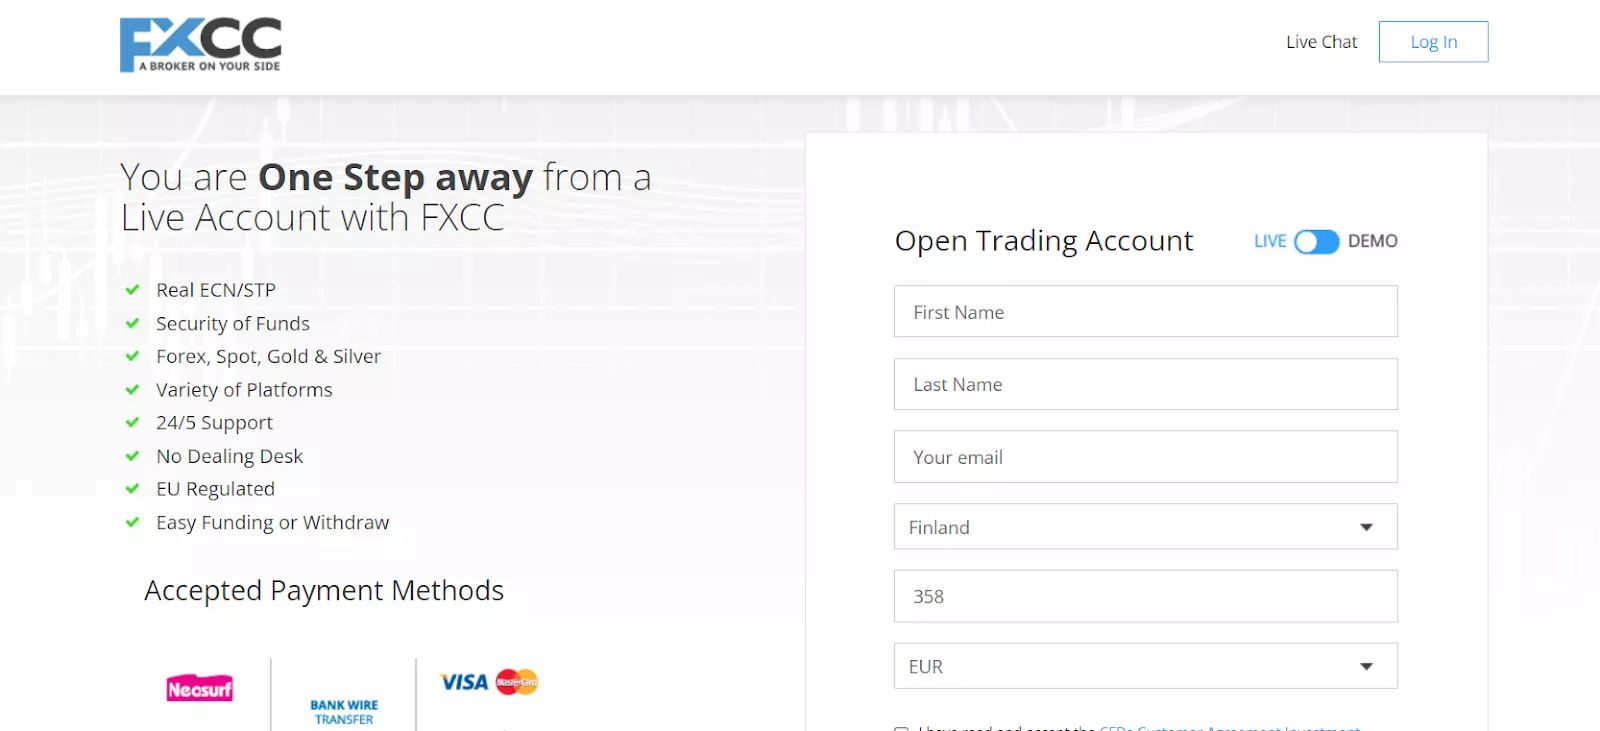 FXCC User Account Review: Entering personal information